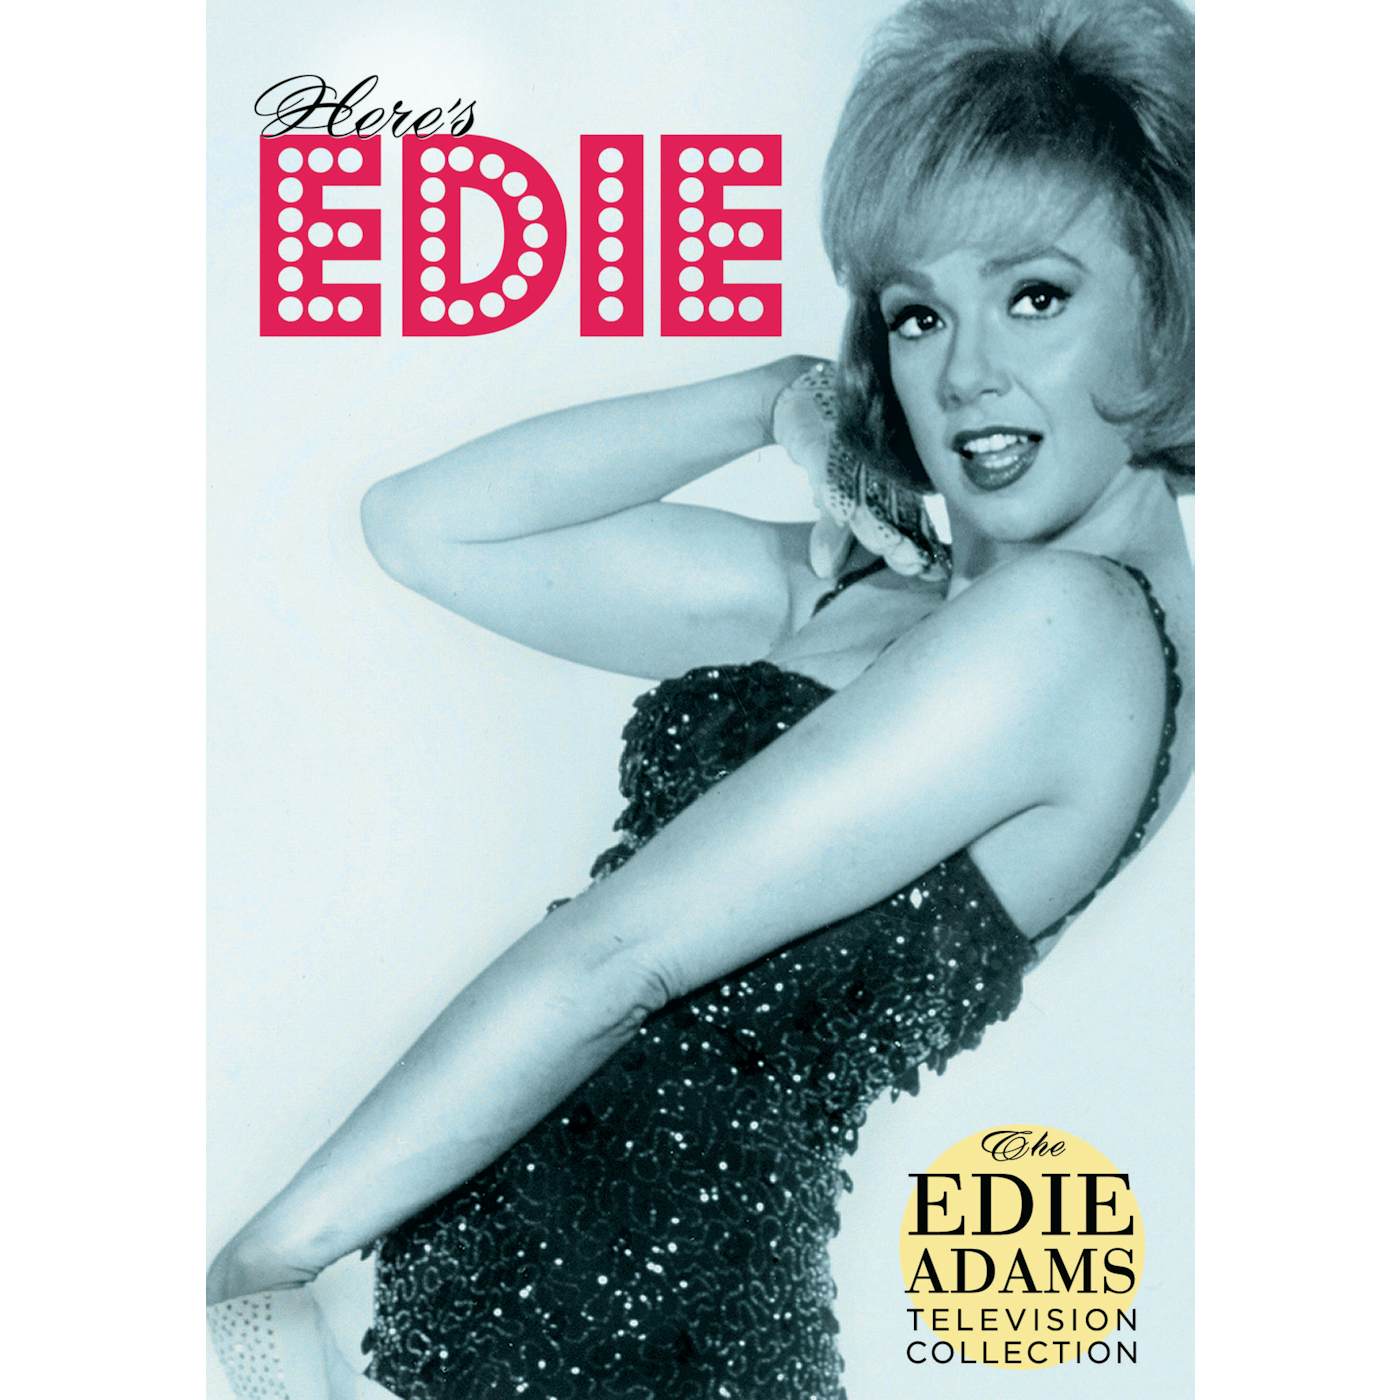 HERE'S EDIE: THE EDIE ADAMS TELEVISION COLLECTION DVD